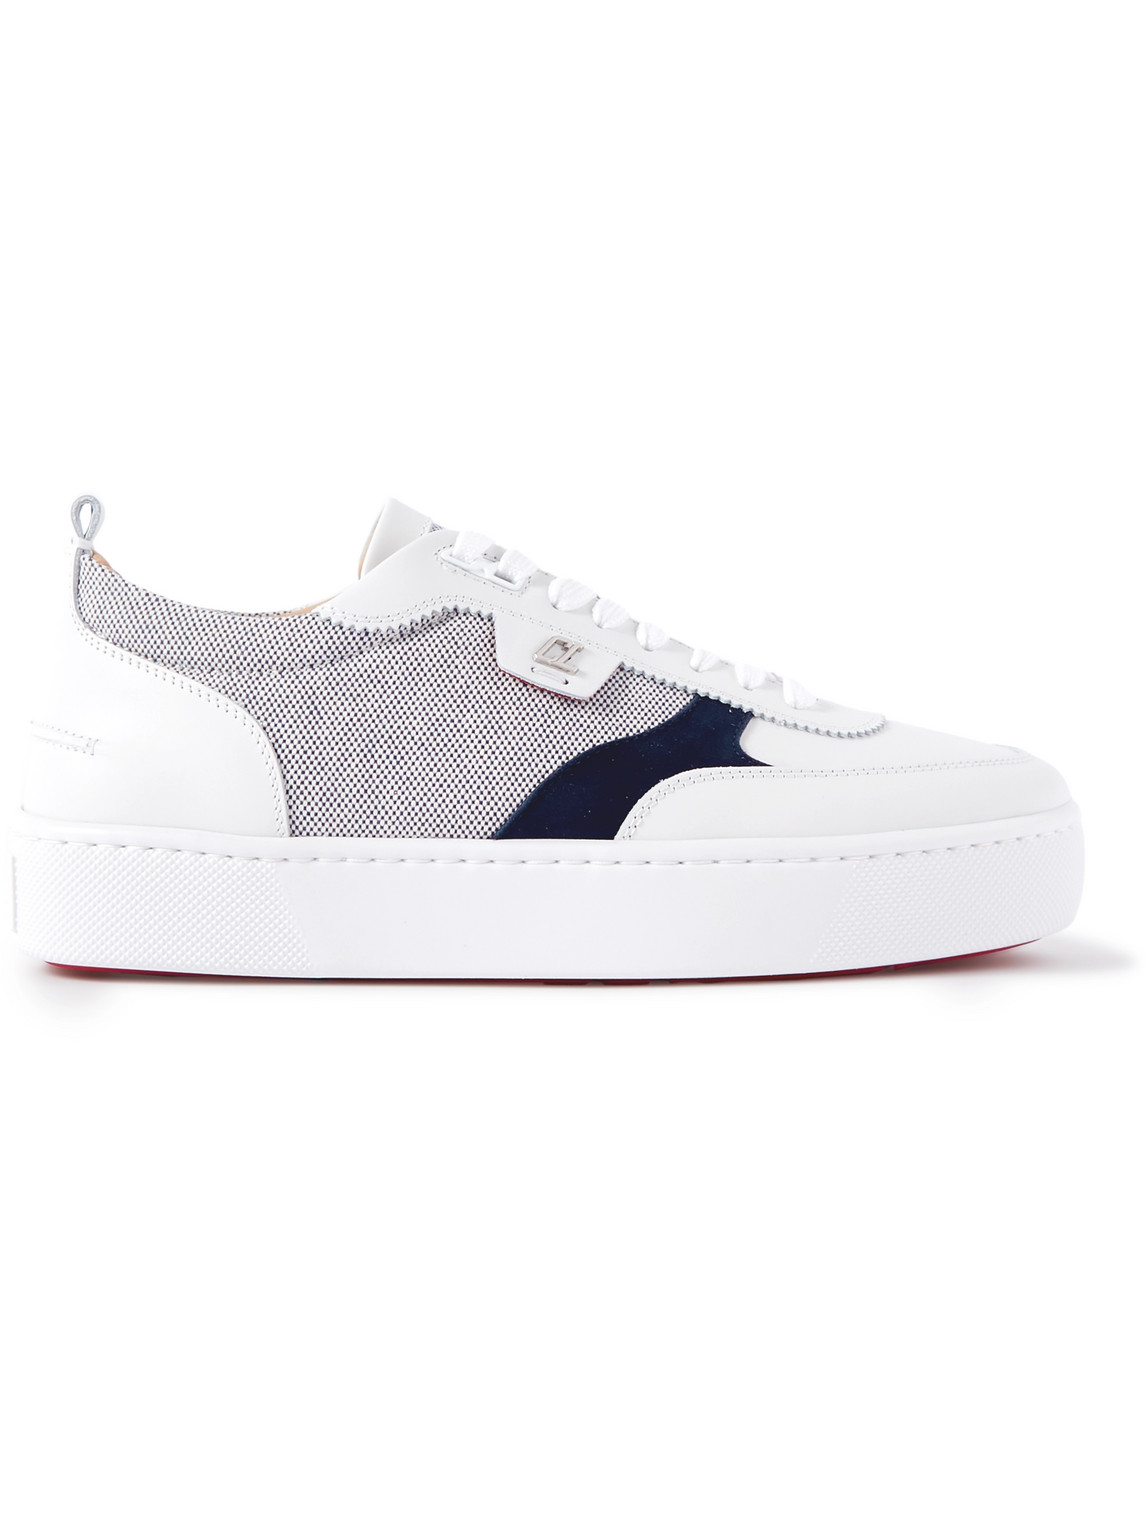 Christian Louboutin Happyrui Canvas And Leather Trainers In White